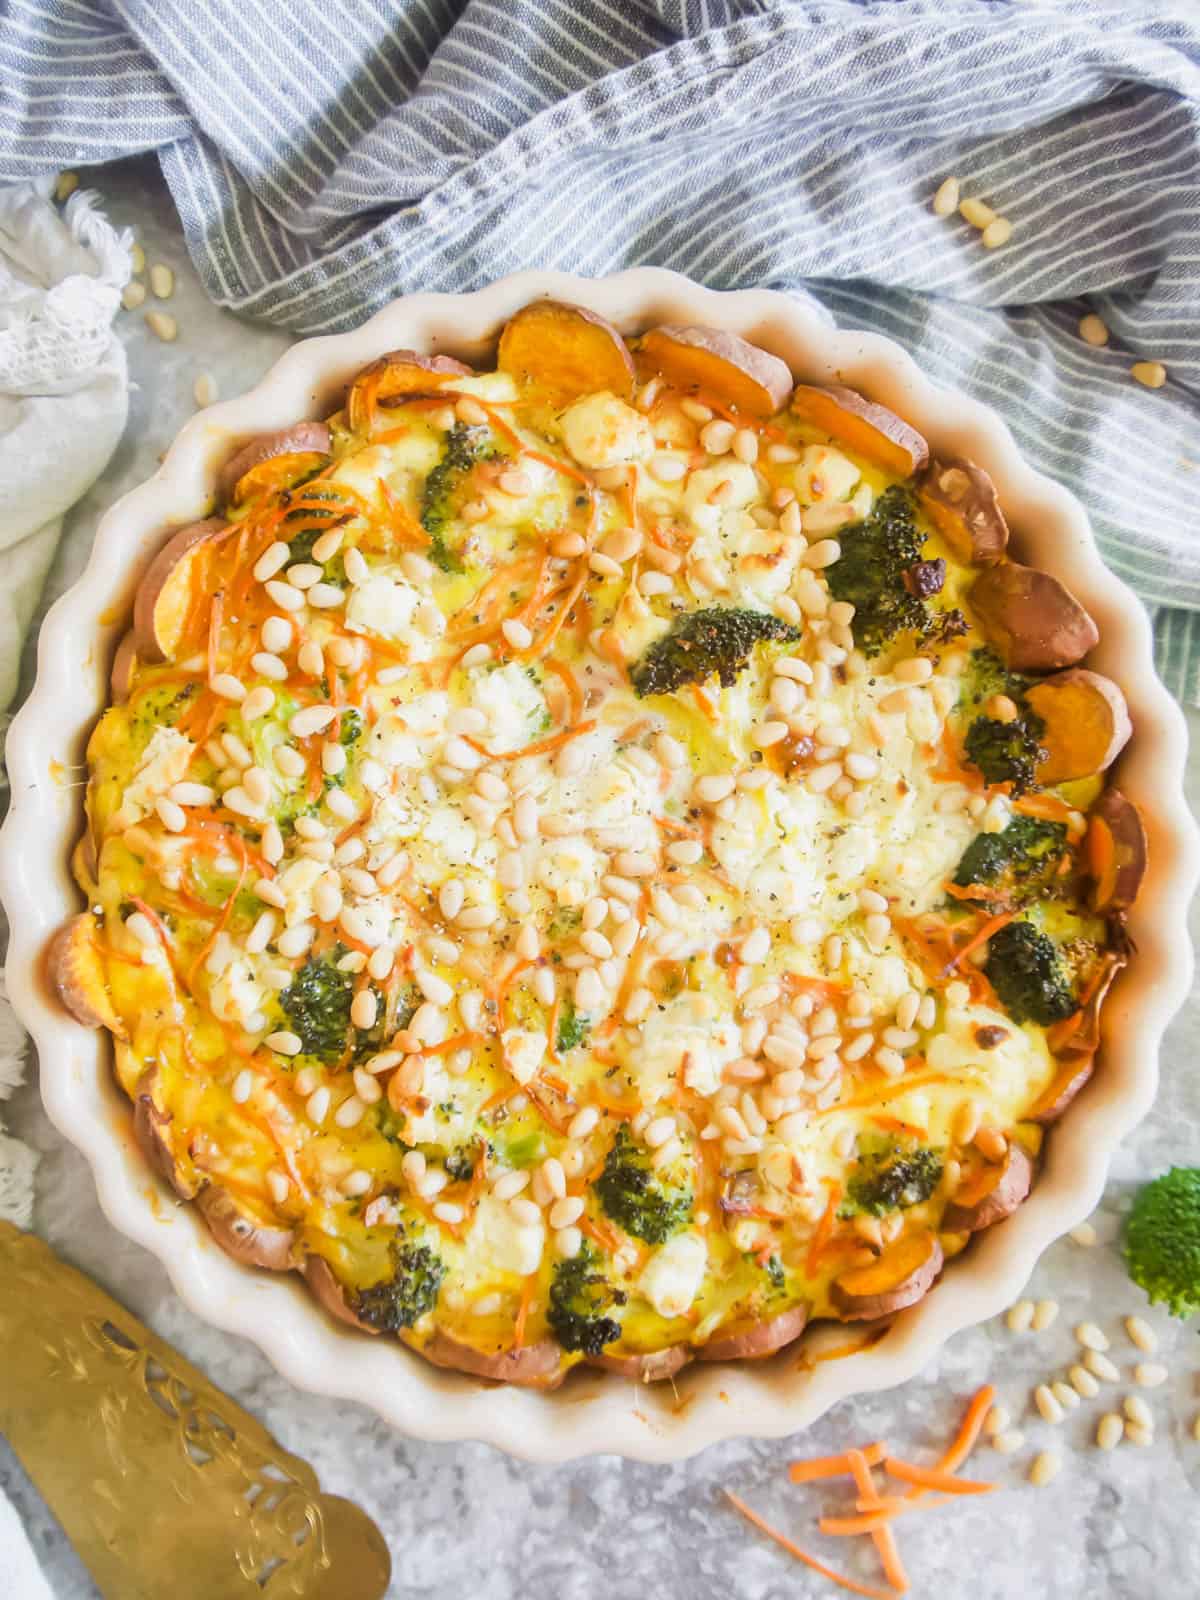 Freshly baked Broccoli Carrot Goat Cheese Quiche with a Sweet Potato Crust.